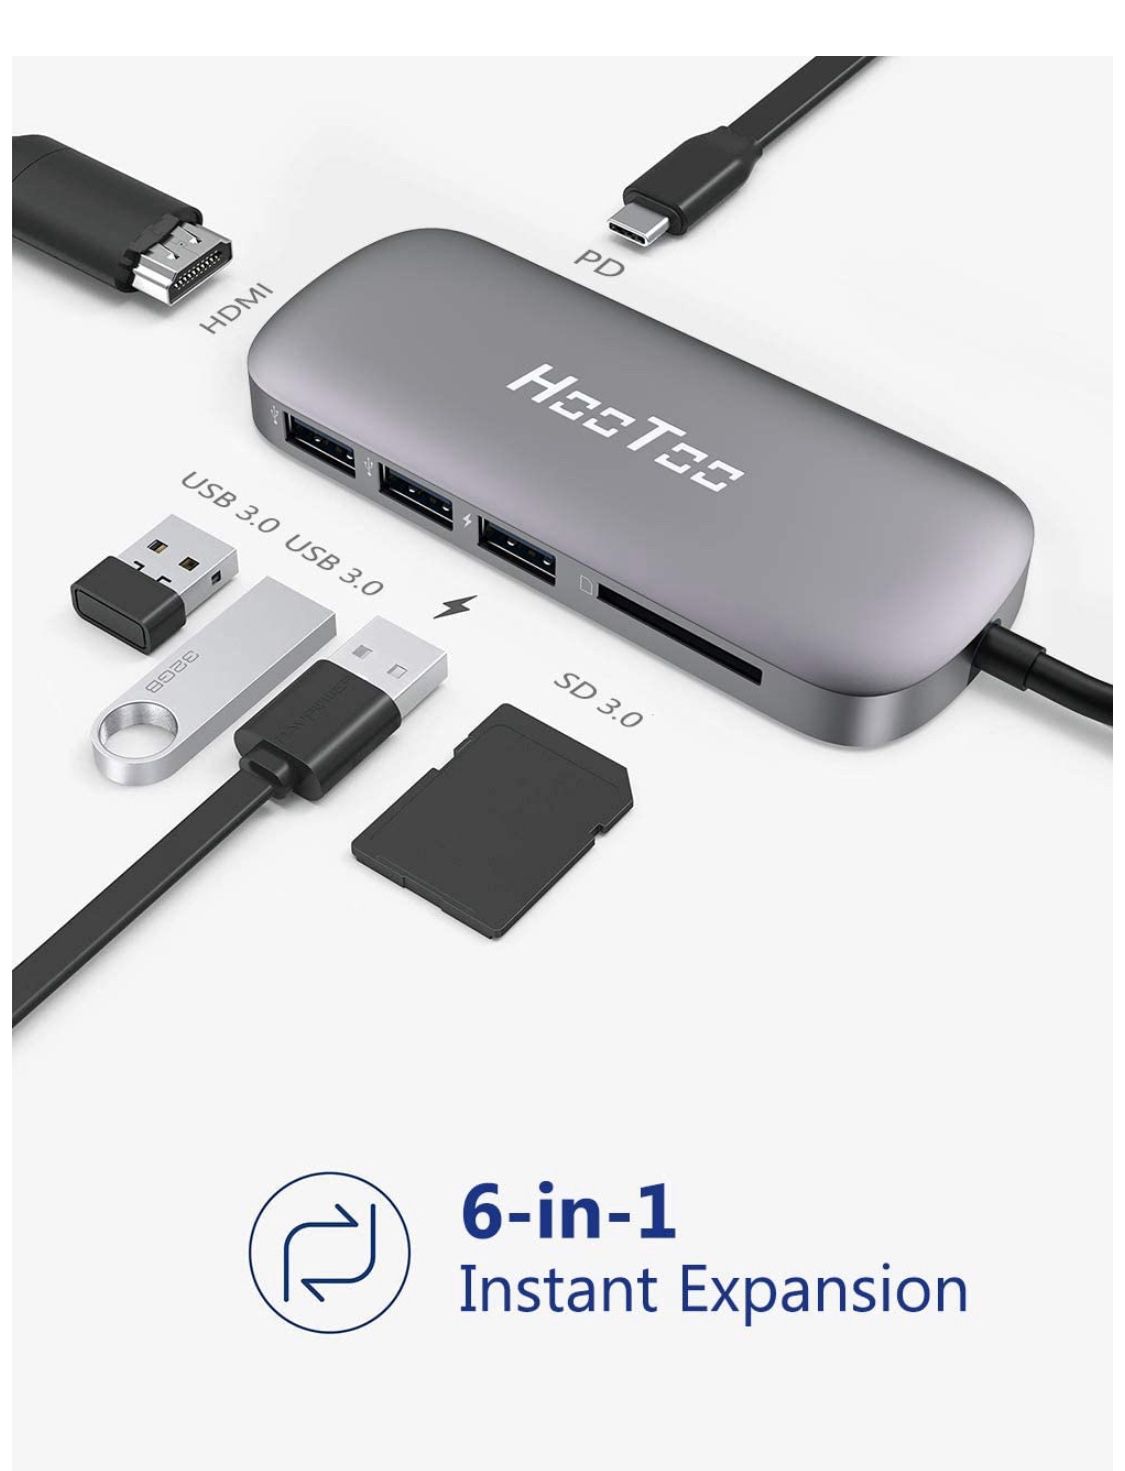 HooToo USB C Hub, 6-In-1 USB C Adapter with 4K USB C to HDMI, 3 USB 3.0 Ports, SD Card Reader, Pd Charging Port for MacBook/Pro/Air Chromebook，And Mo